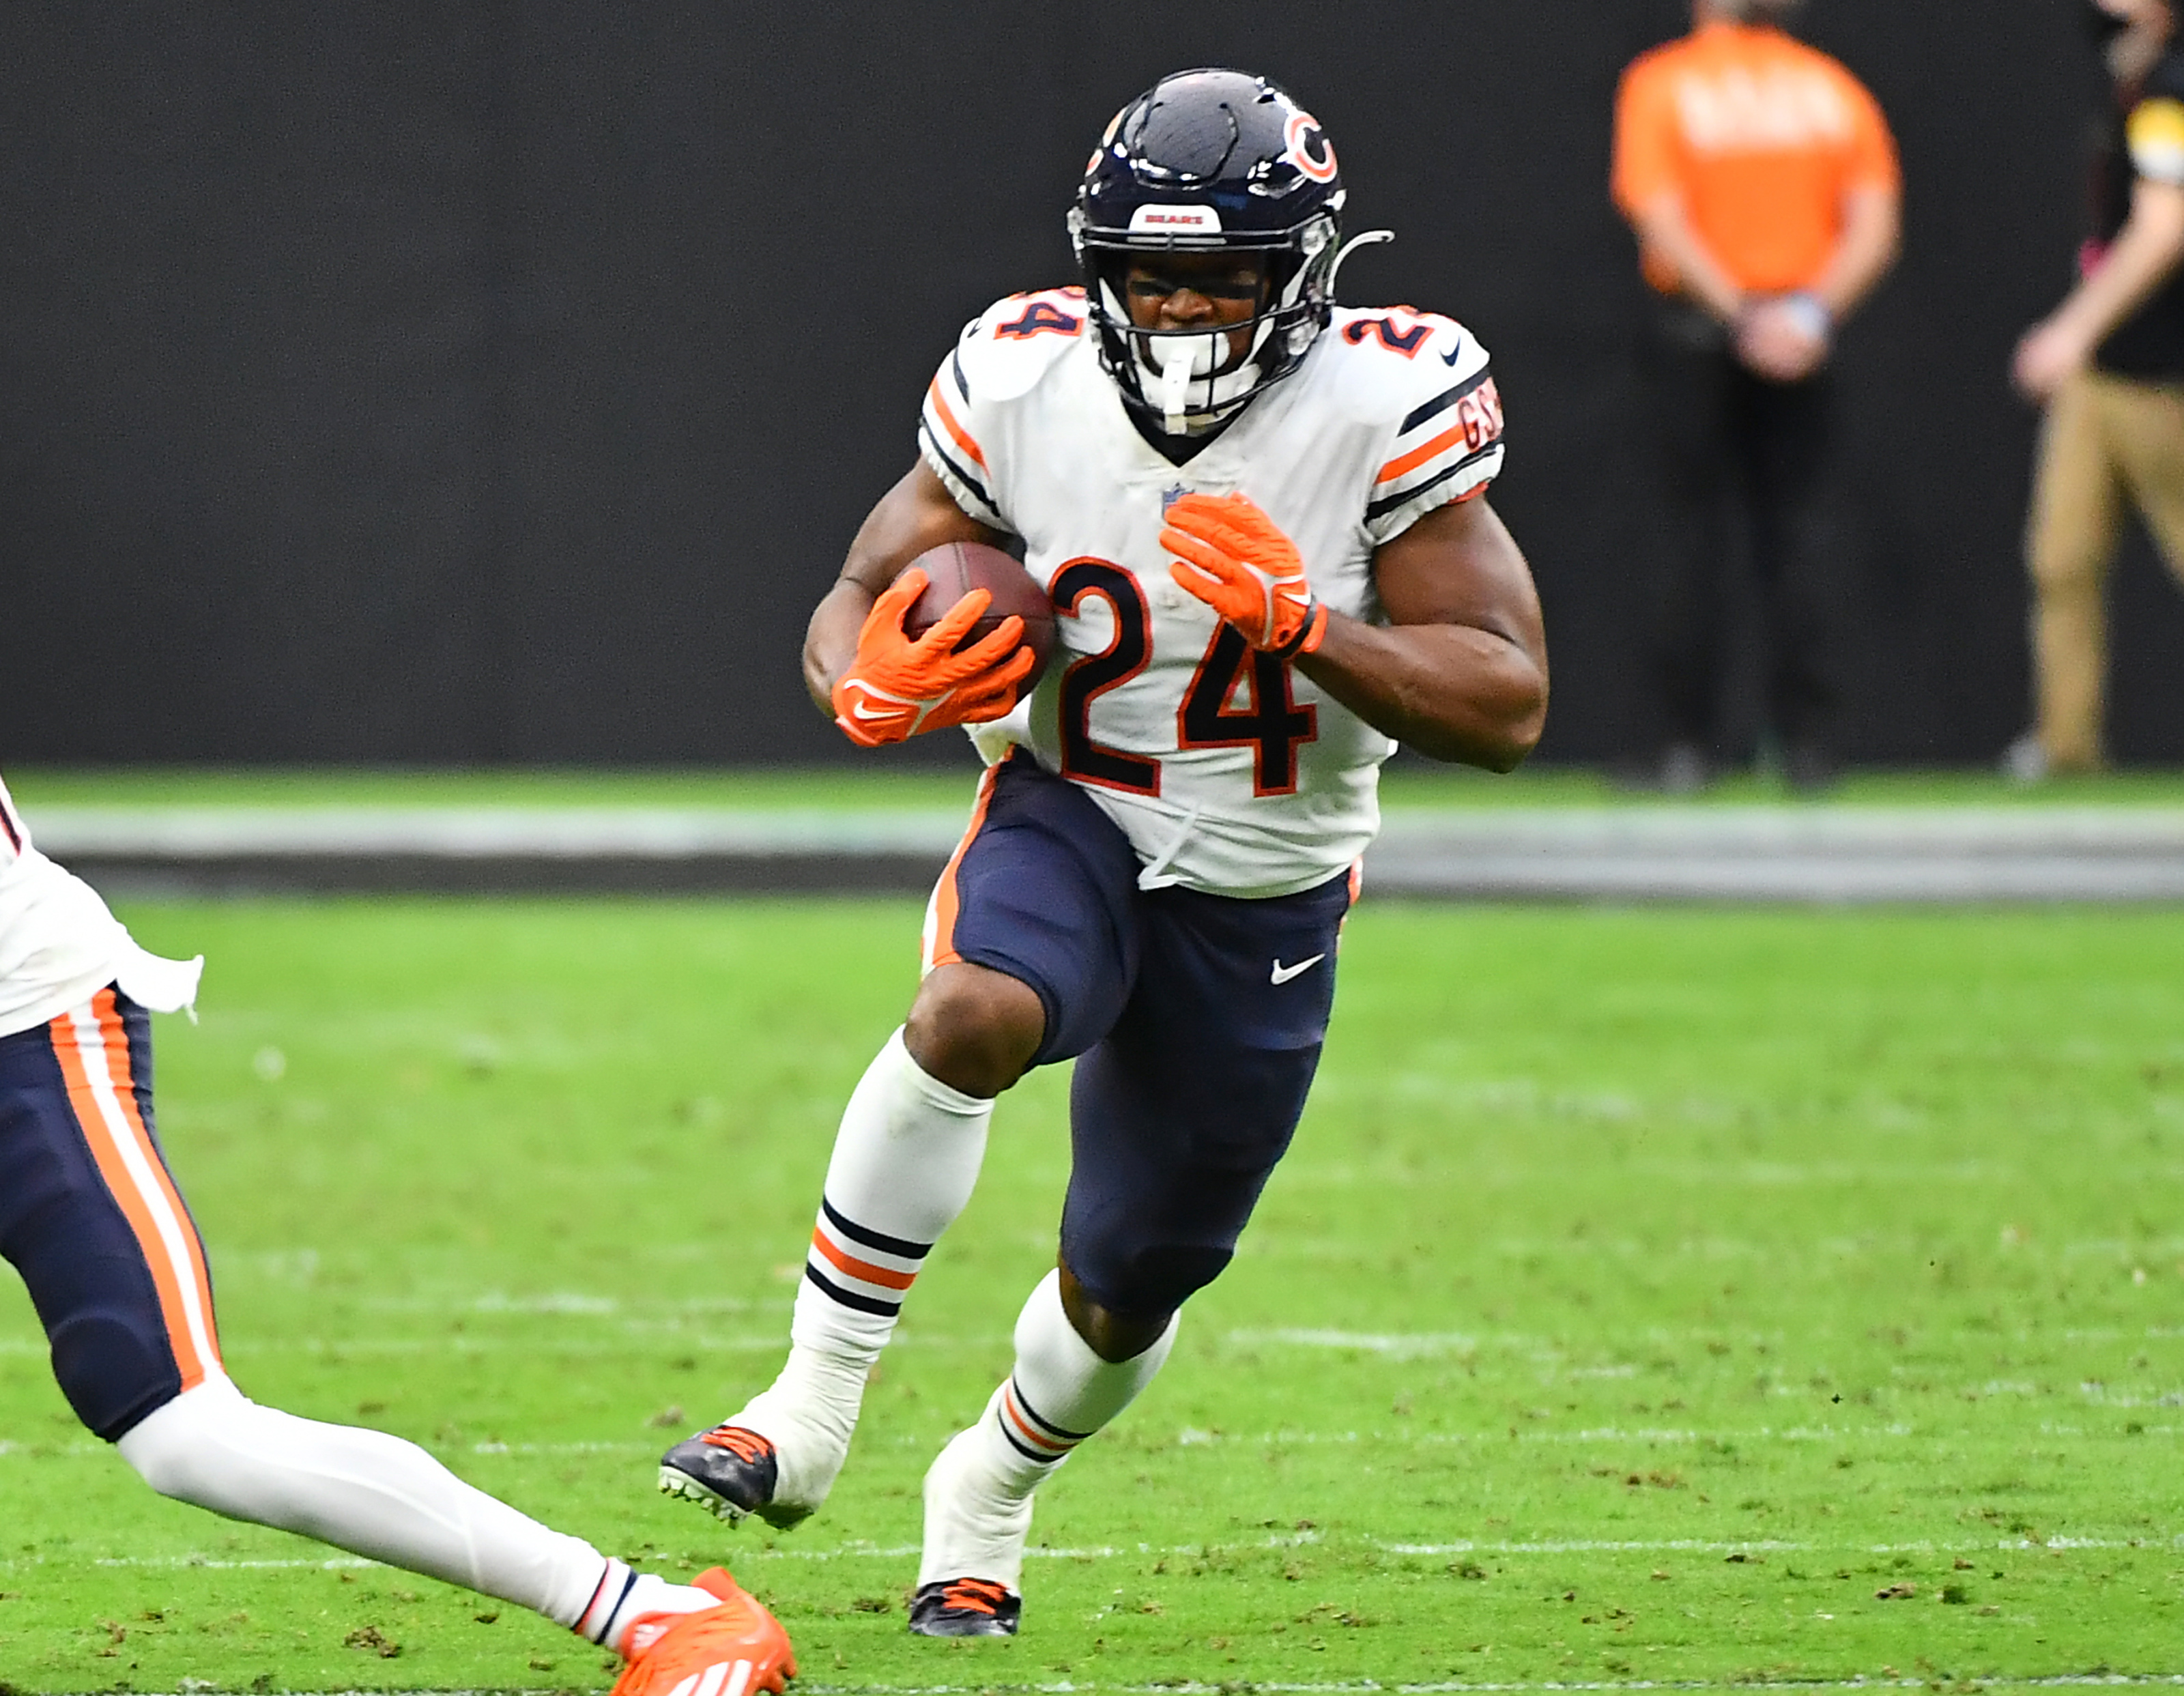 Chicago Bears: Khalil Herbert plays well in place of David Montgomery